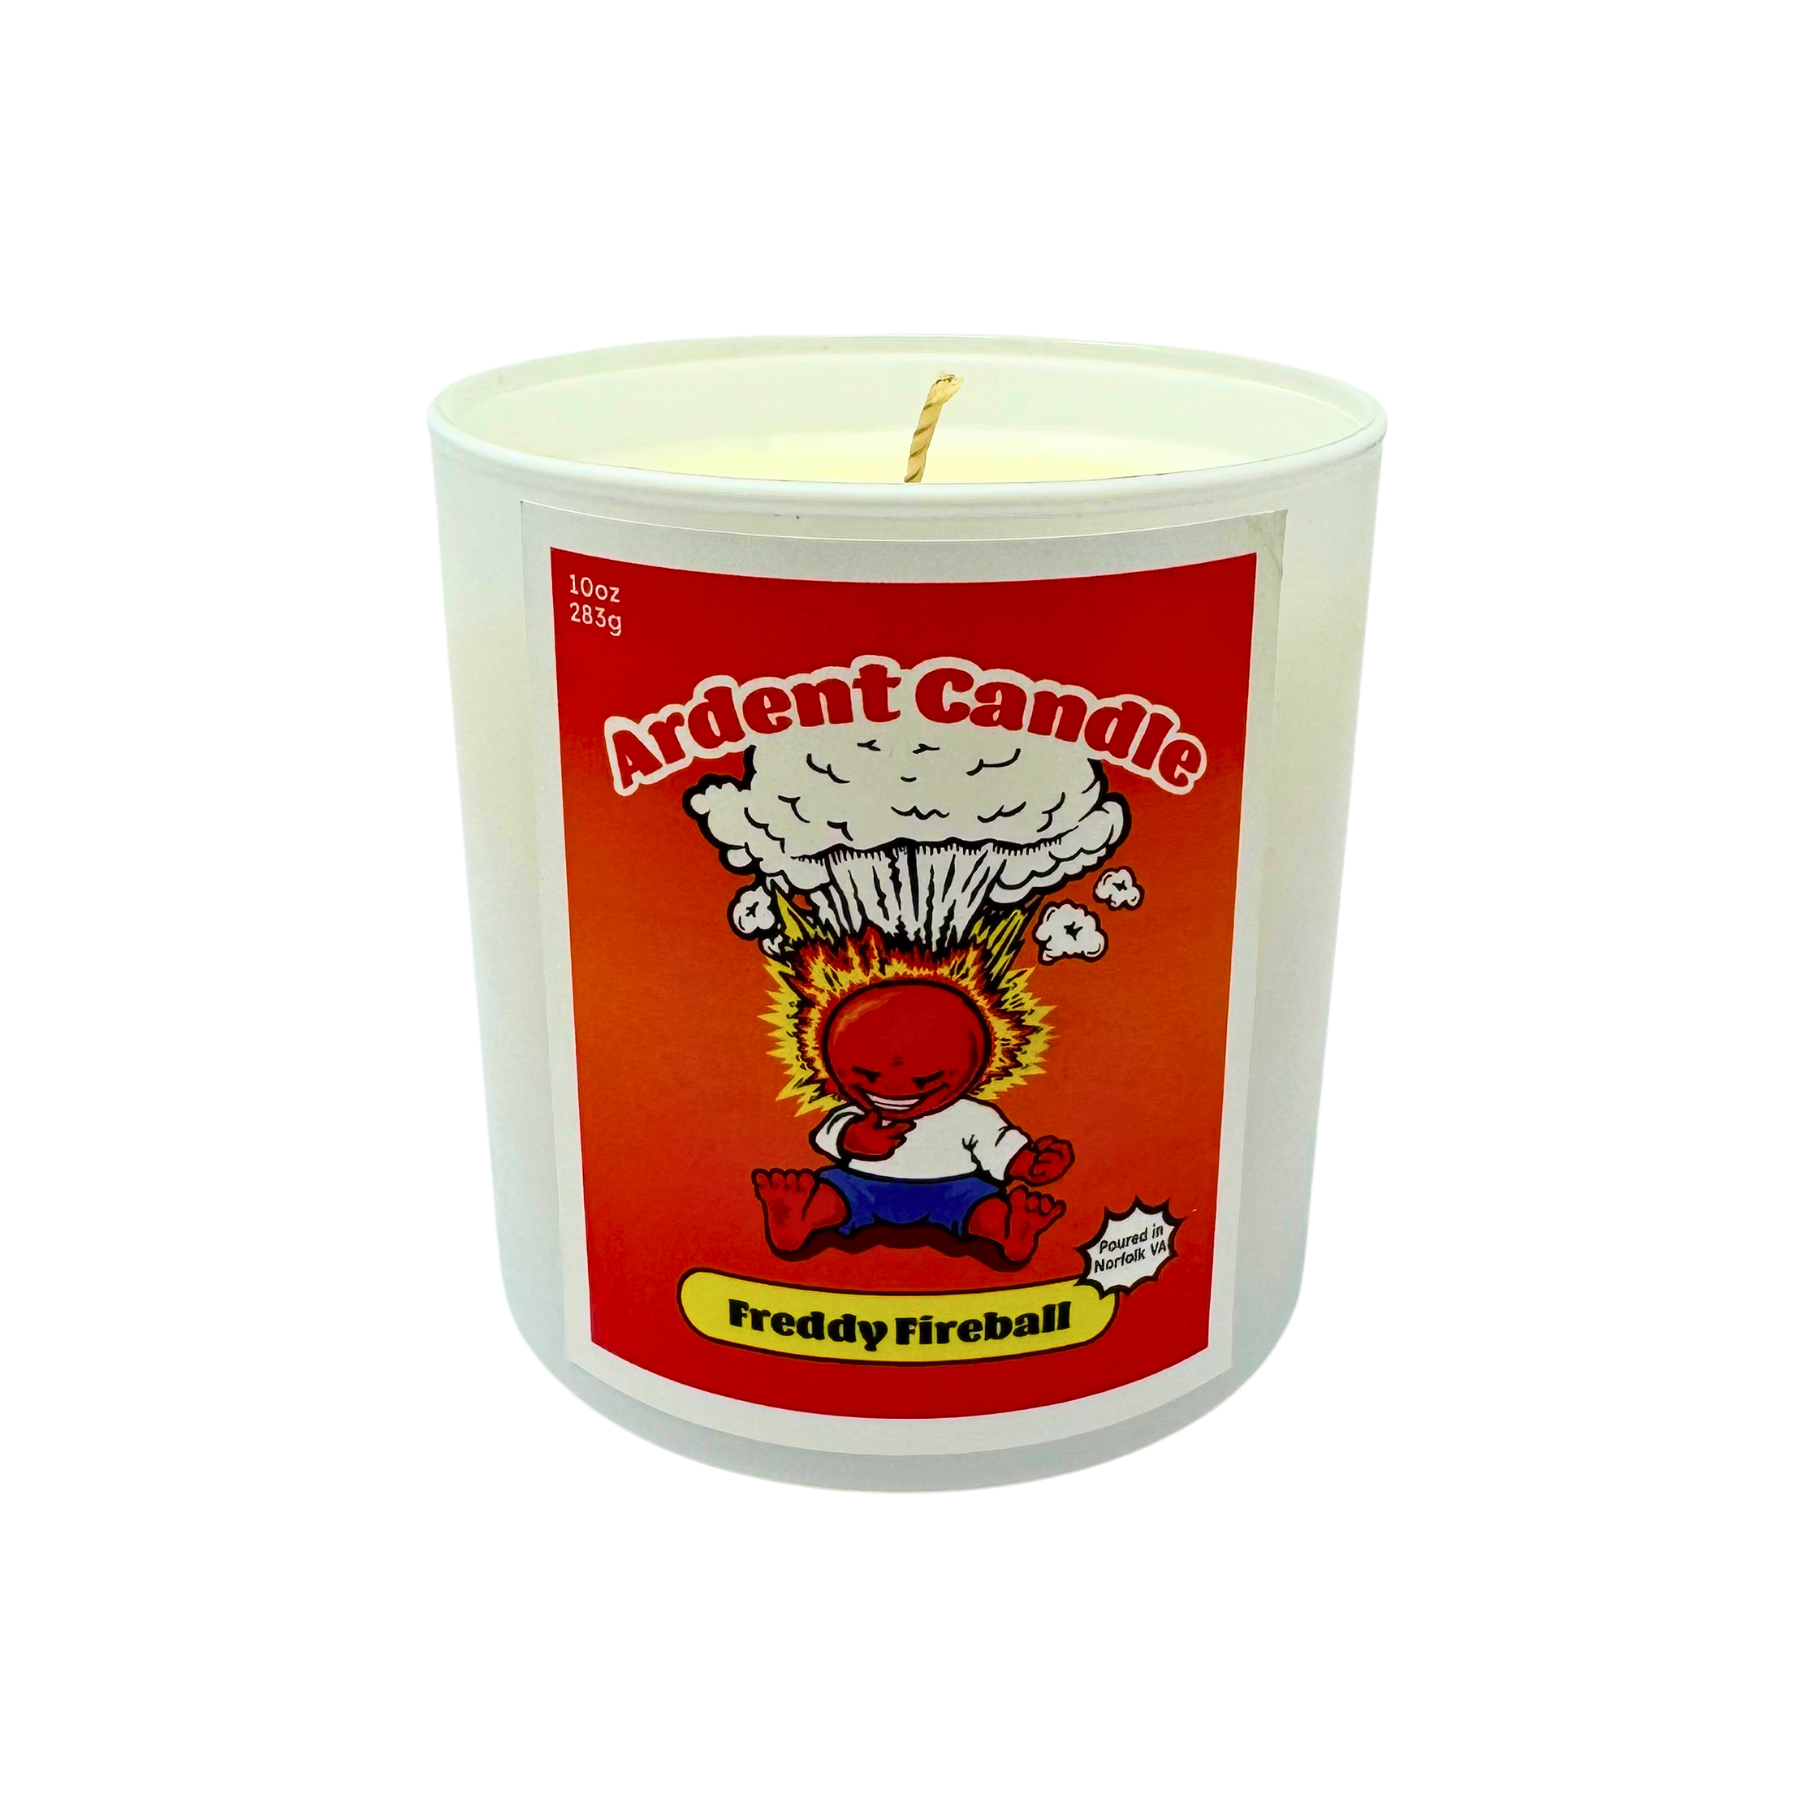 Freddy Fireball Scented Candle